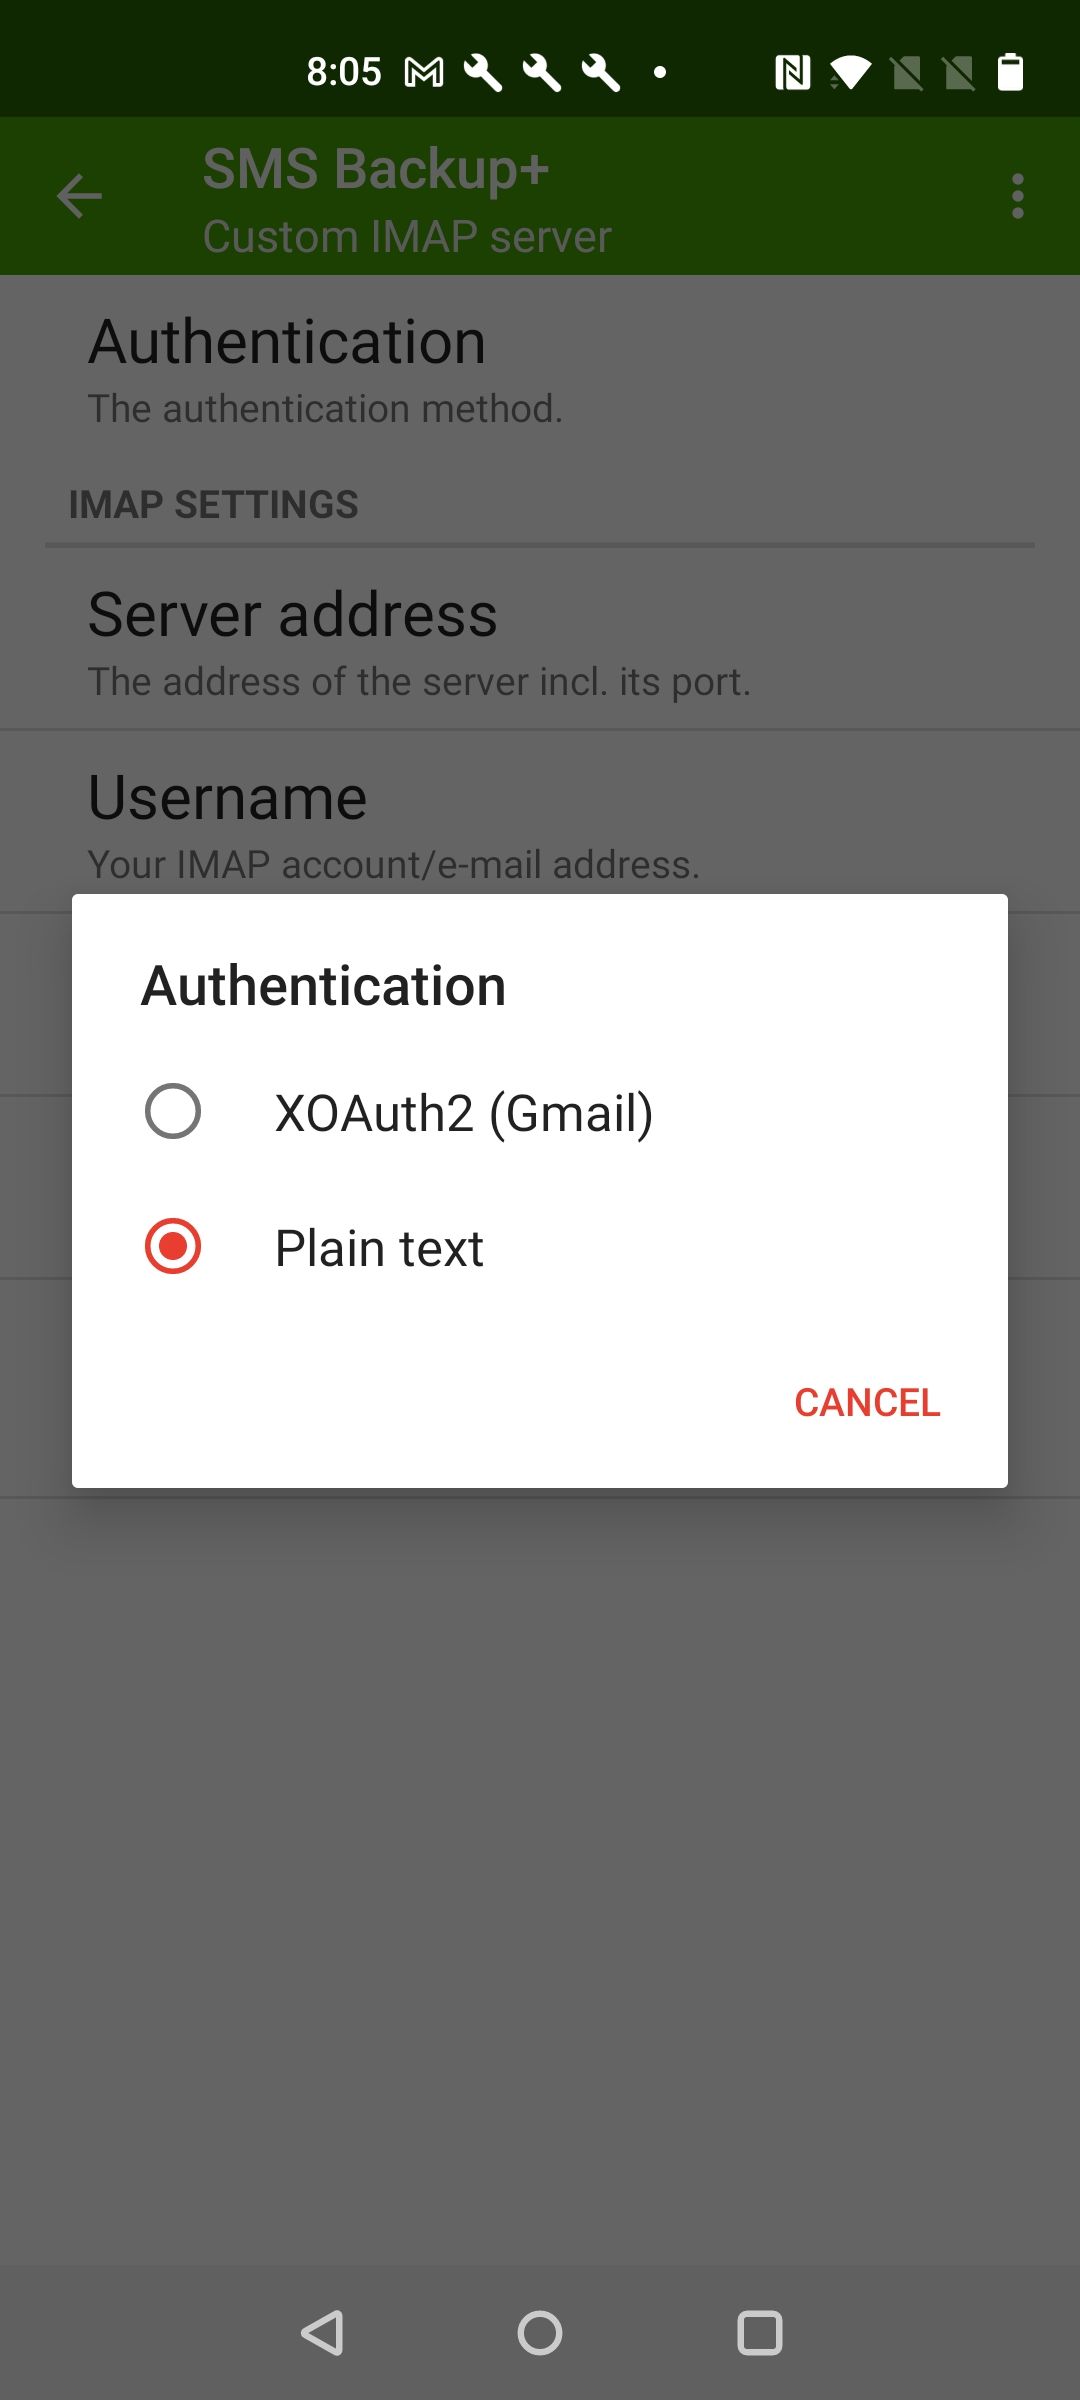 Screenshot highlighting 'Plain text' authentication option in SMS Backup+